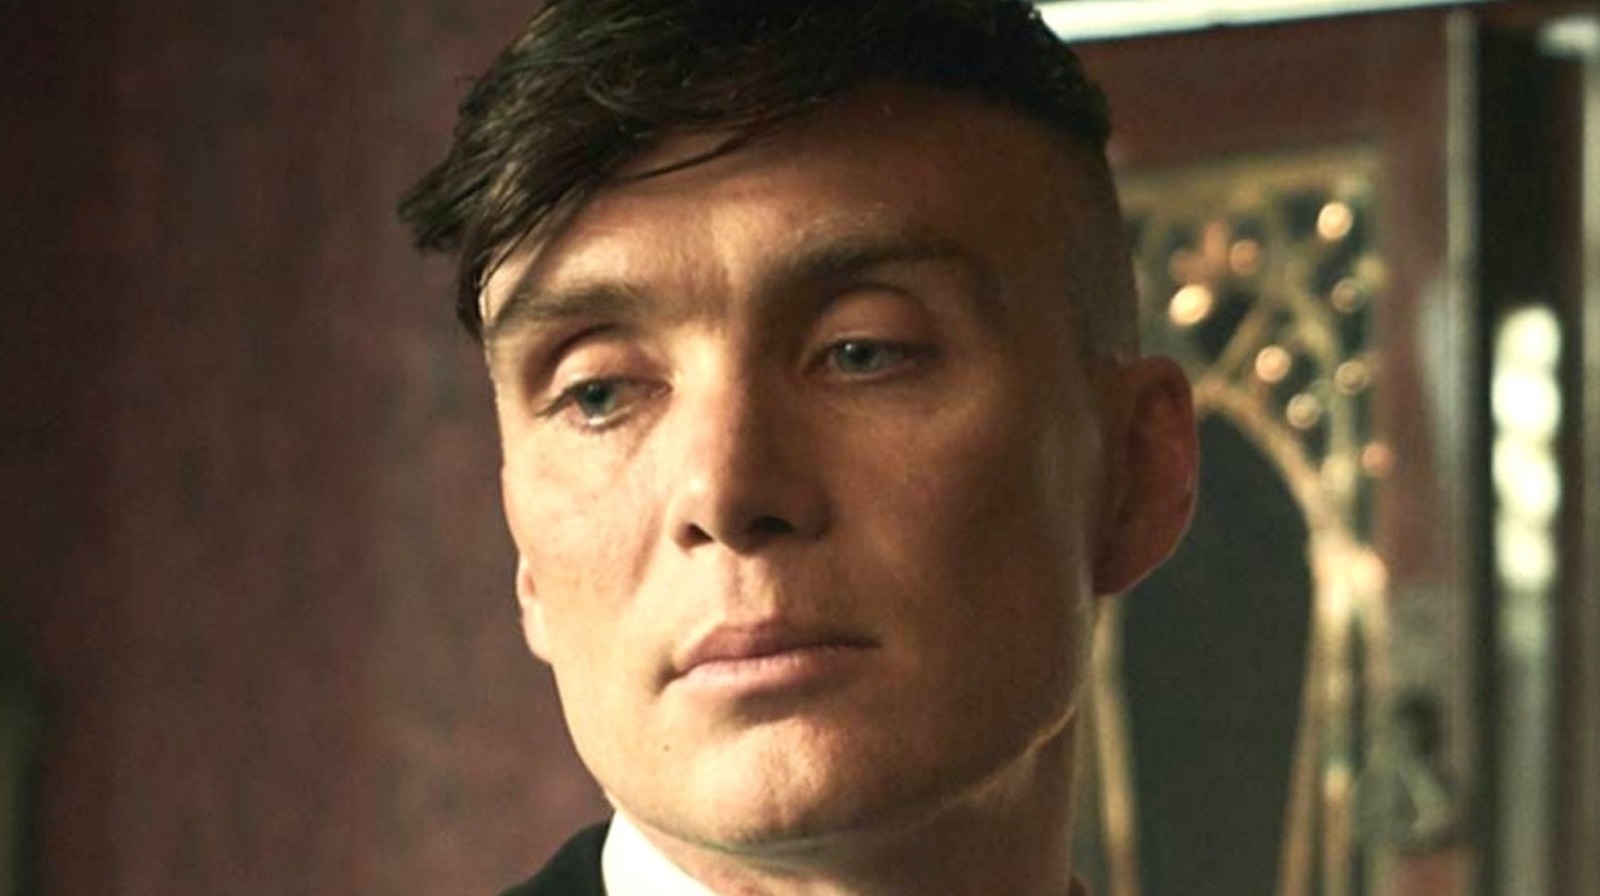 Peaky Blinders: what does the name mean? Did they really have razor blades  in their hats?